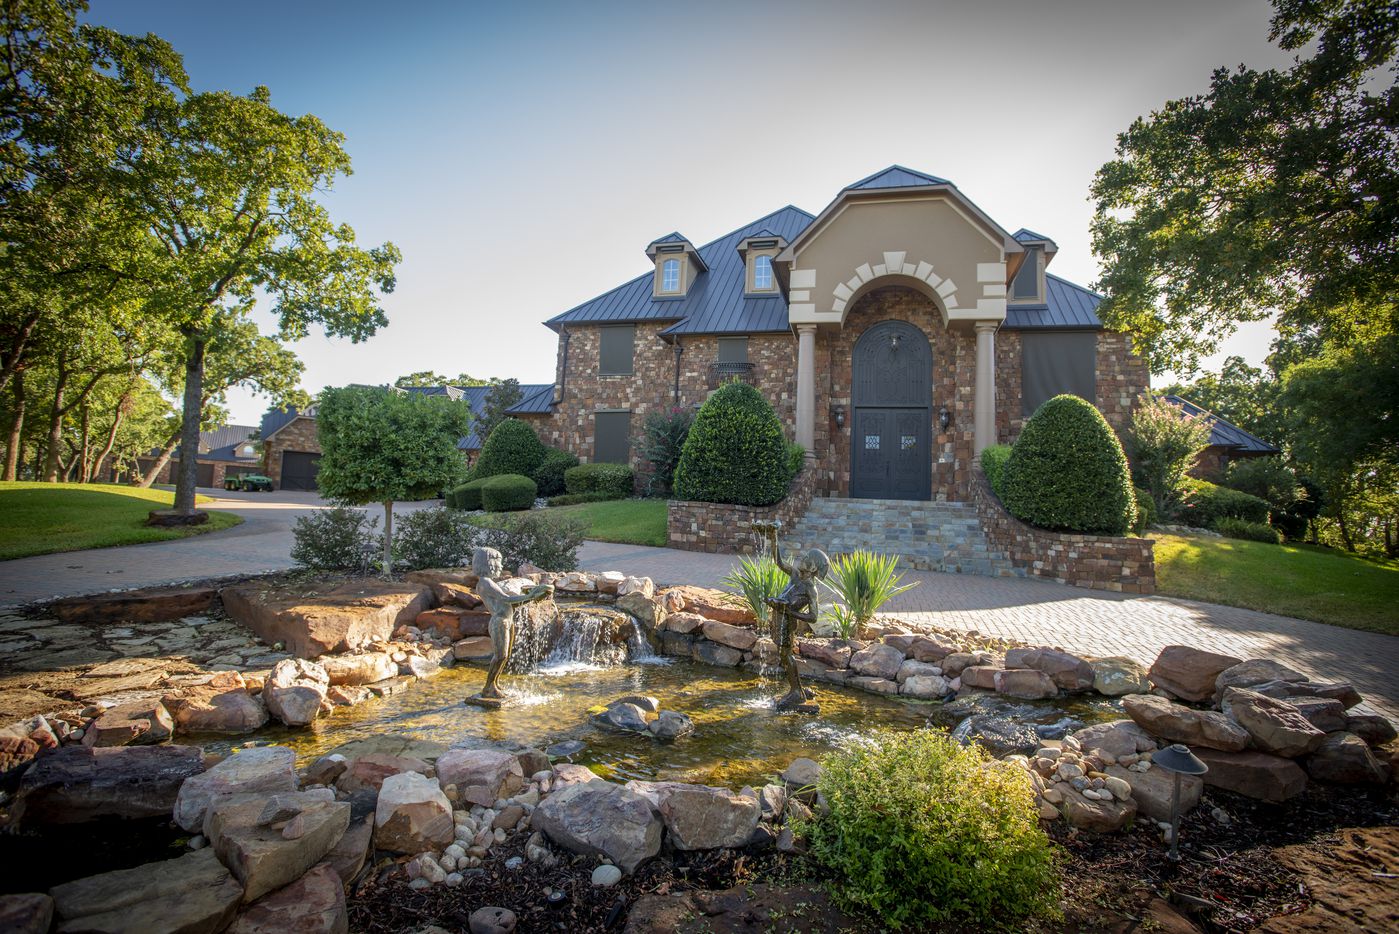 Exterior of main house at 5101 Kensington Ct., in Flower Mound, Texas on August 19, 2020....